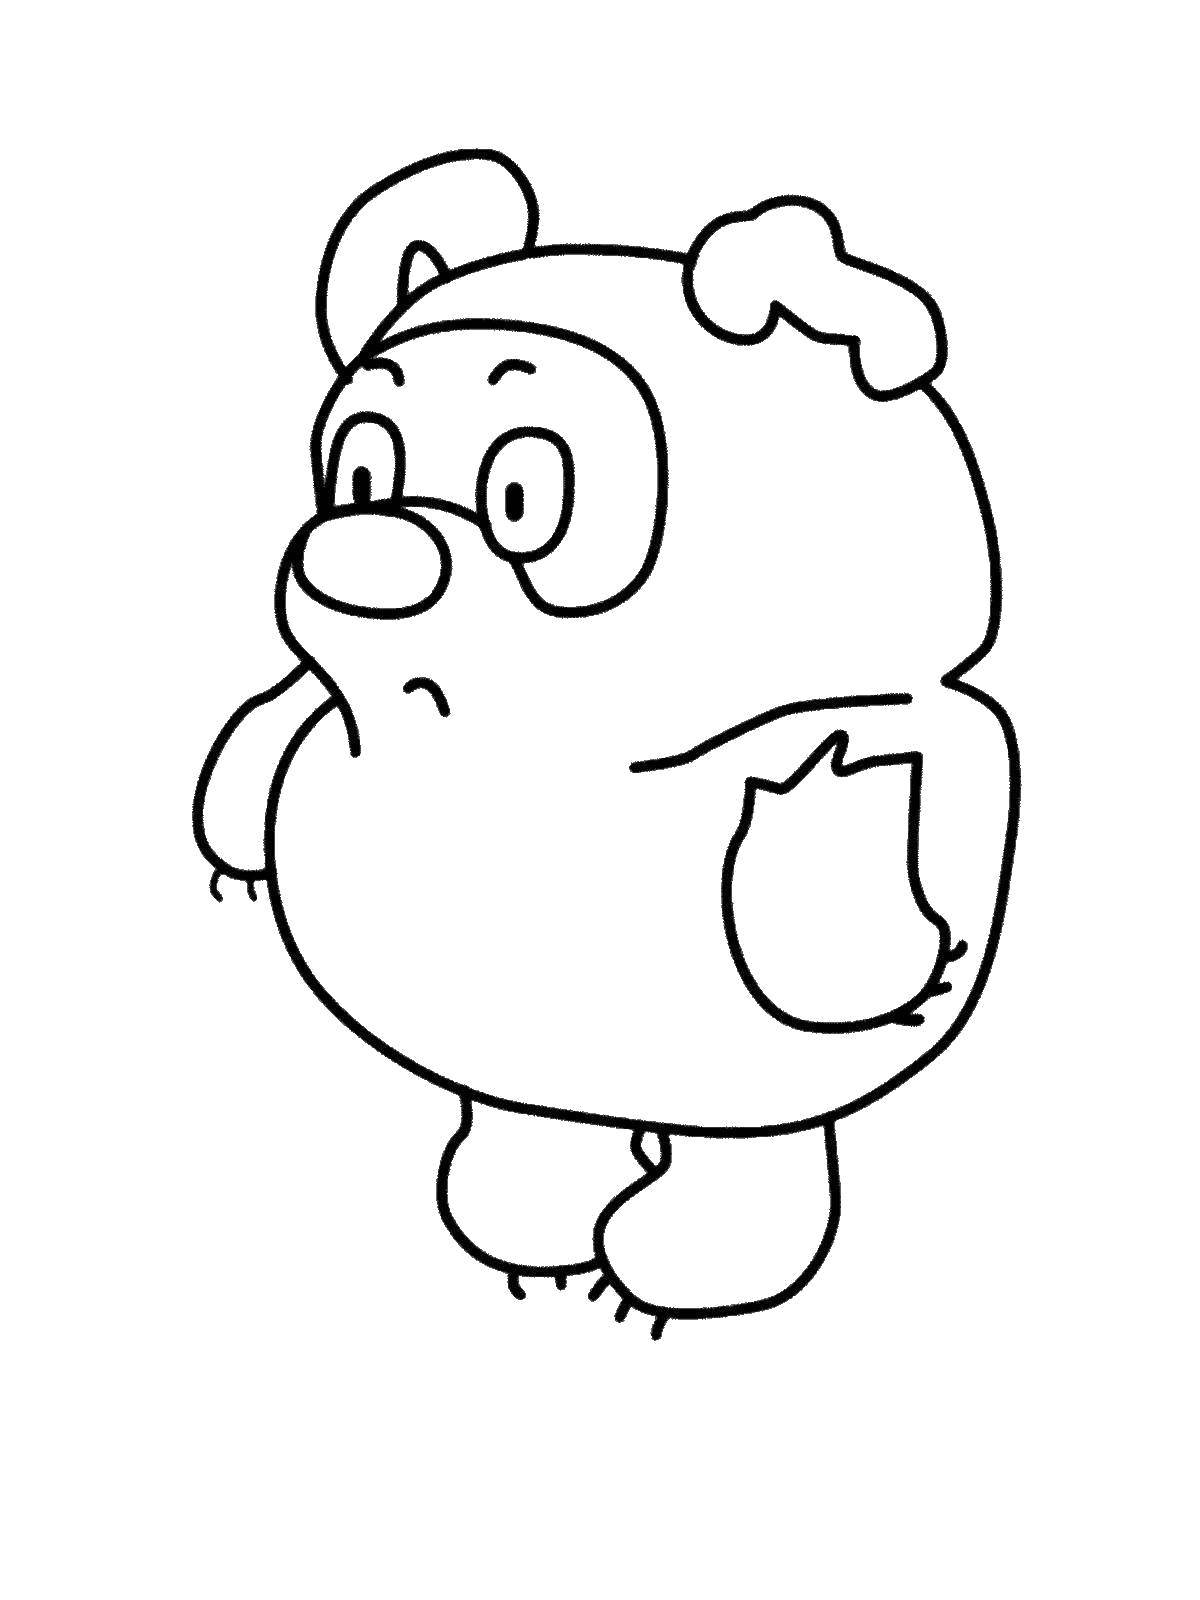 Coloring Winnie the Pooh. Category Cartoon character. Tags:  Cartoon character, Winnie the Pooh.